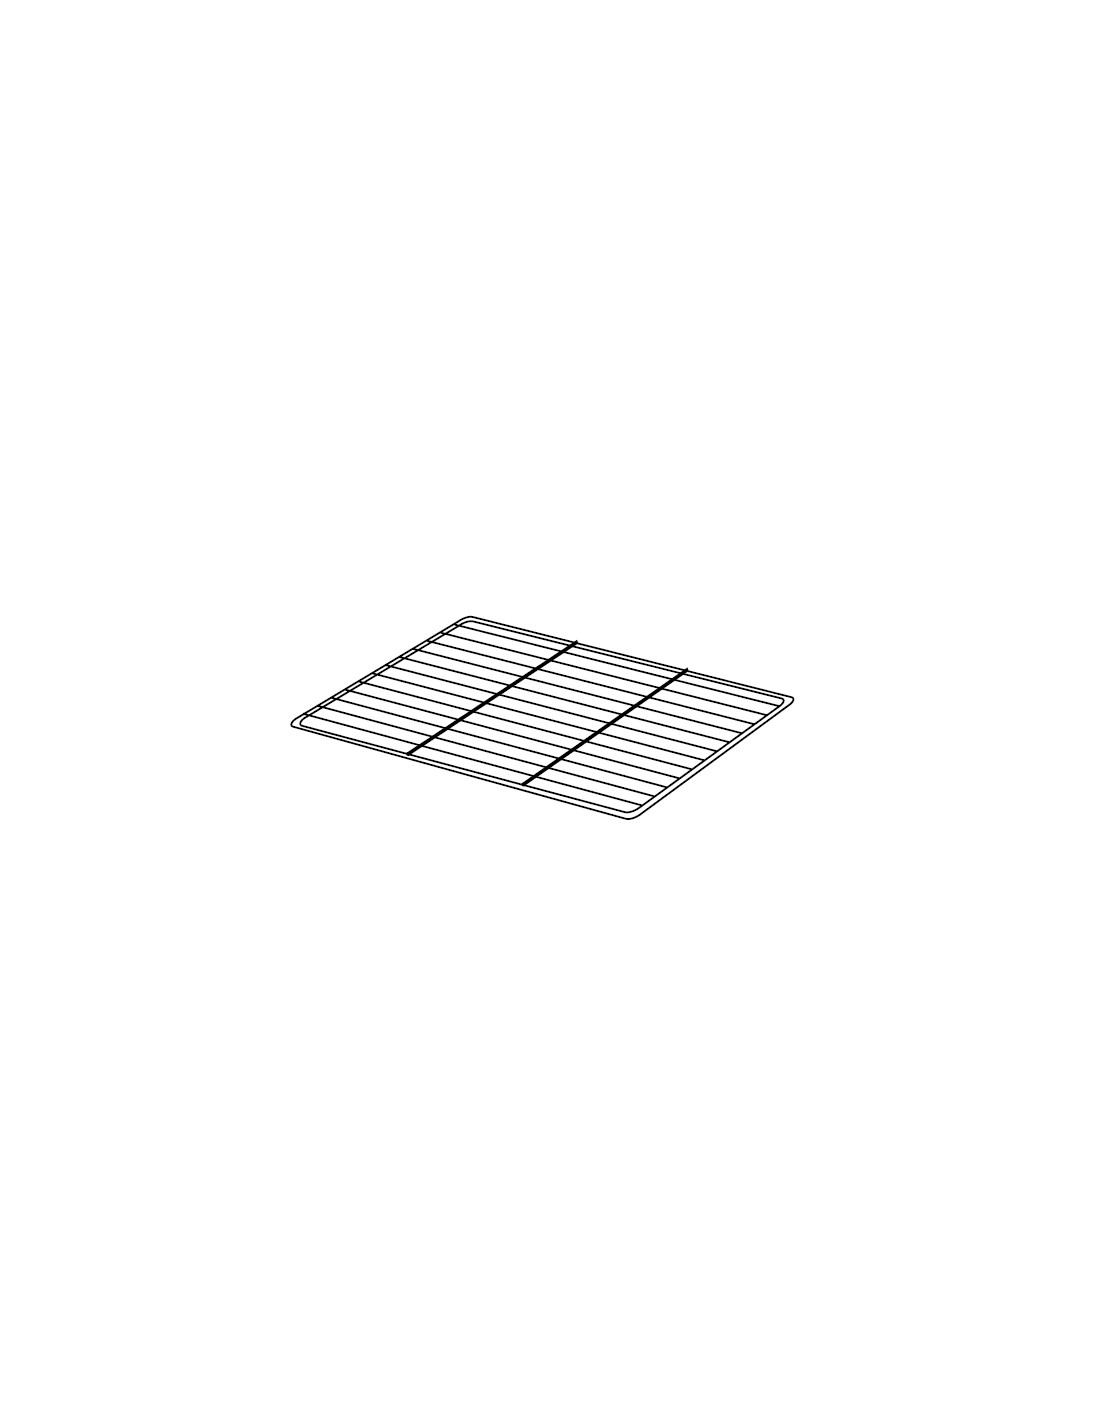 Stainless steel grate 55 x 53 cm